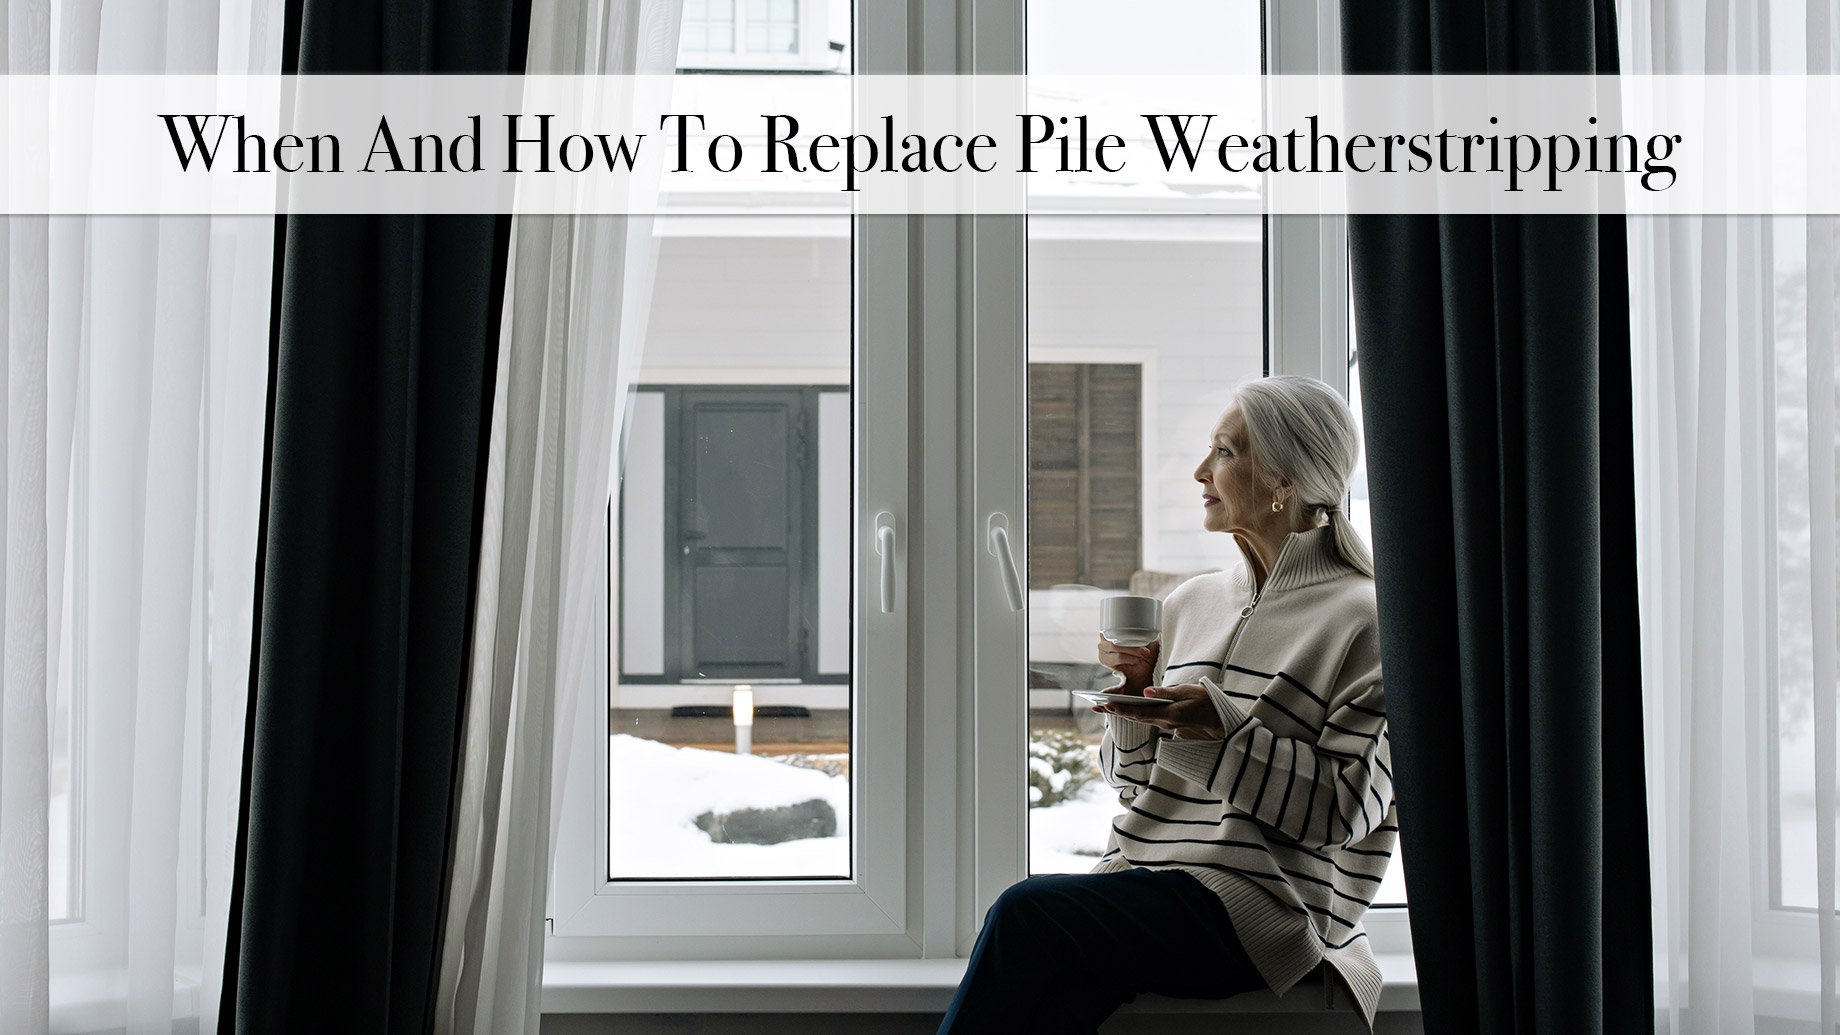 When And How To Replace Pile Weatherstripping